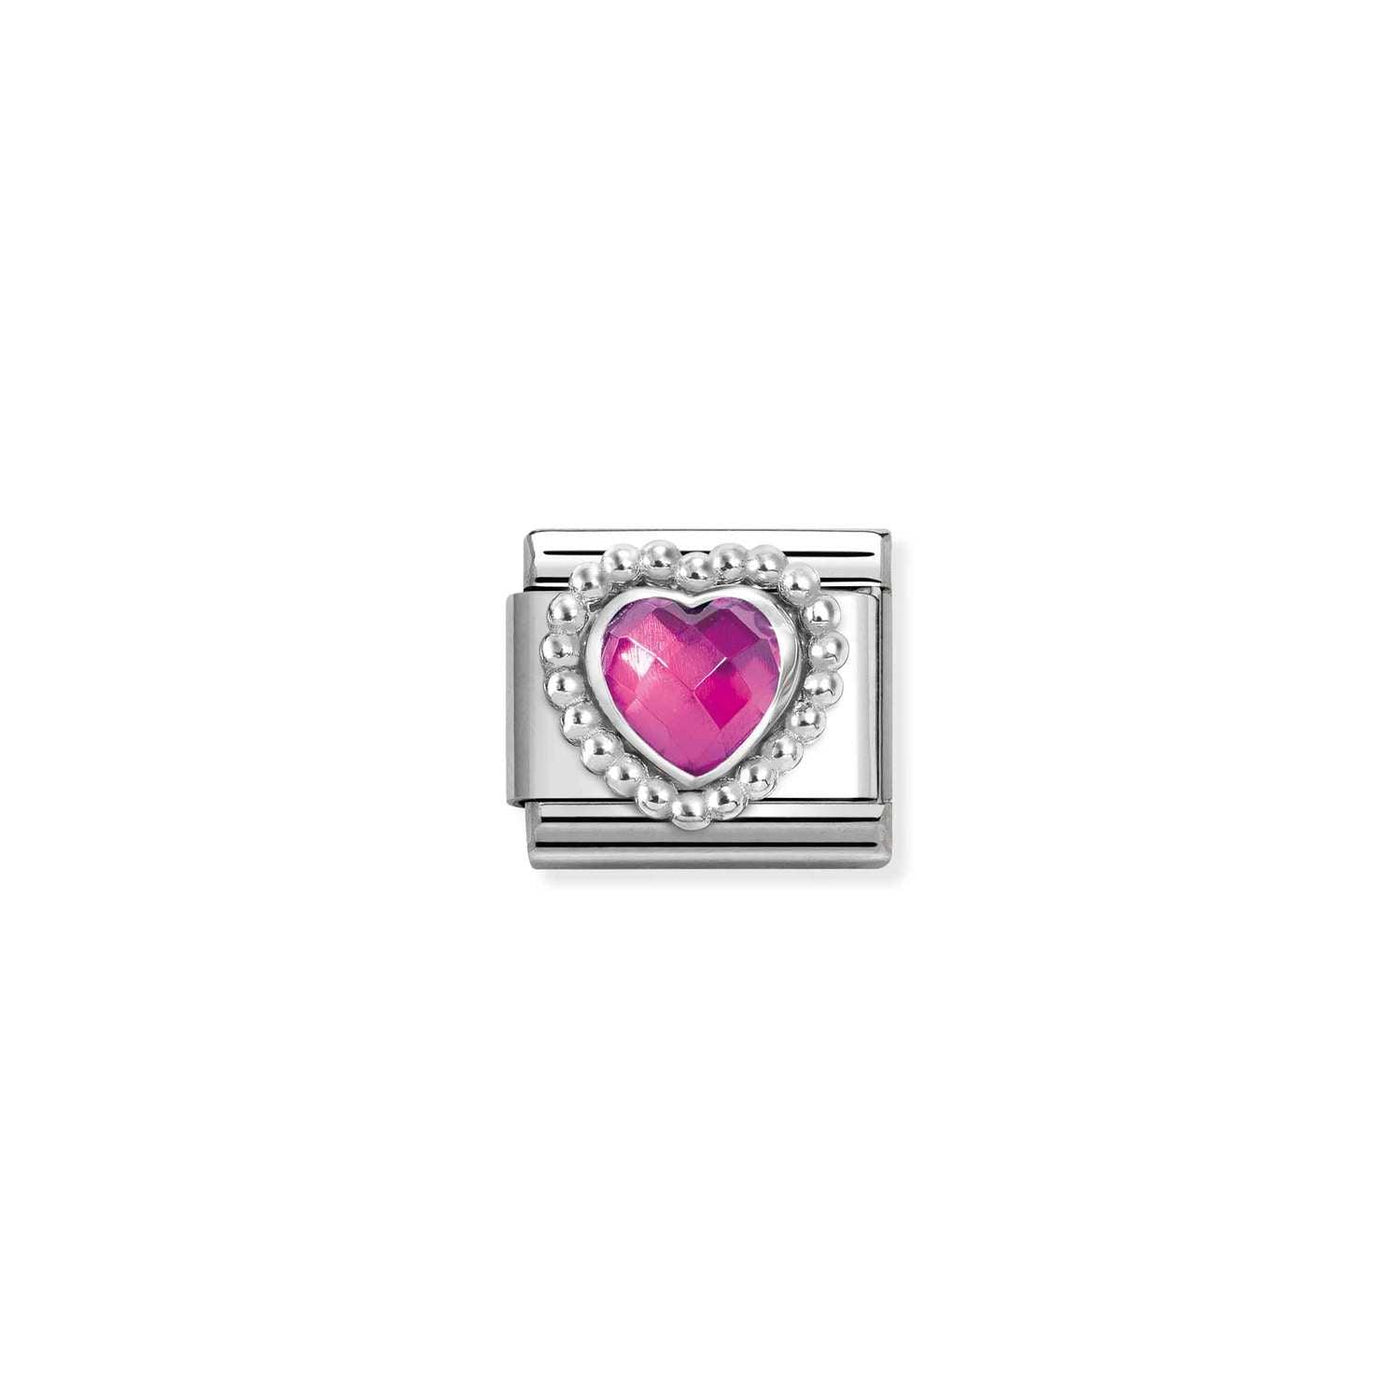 Nomination Faceted Fuchsia Heart Charm